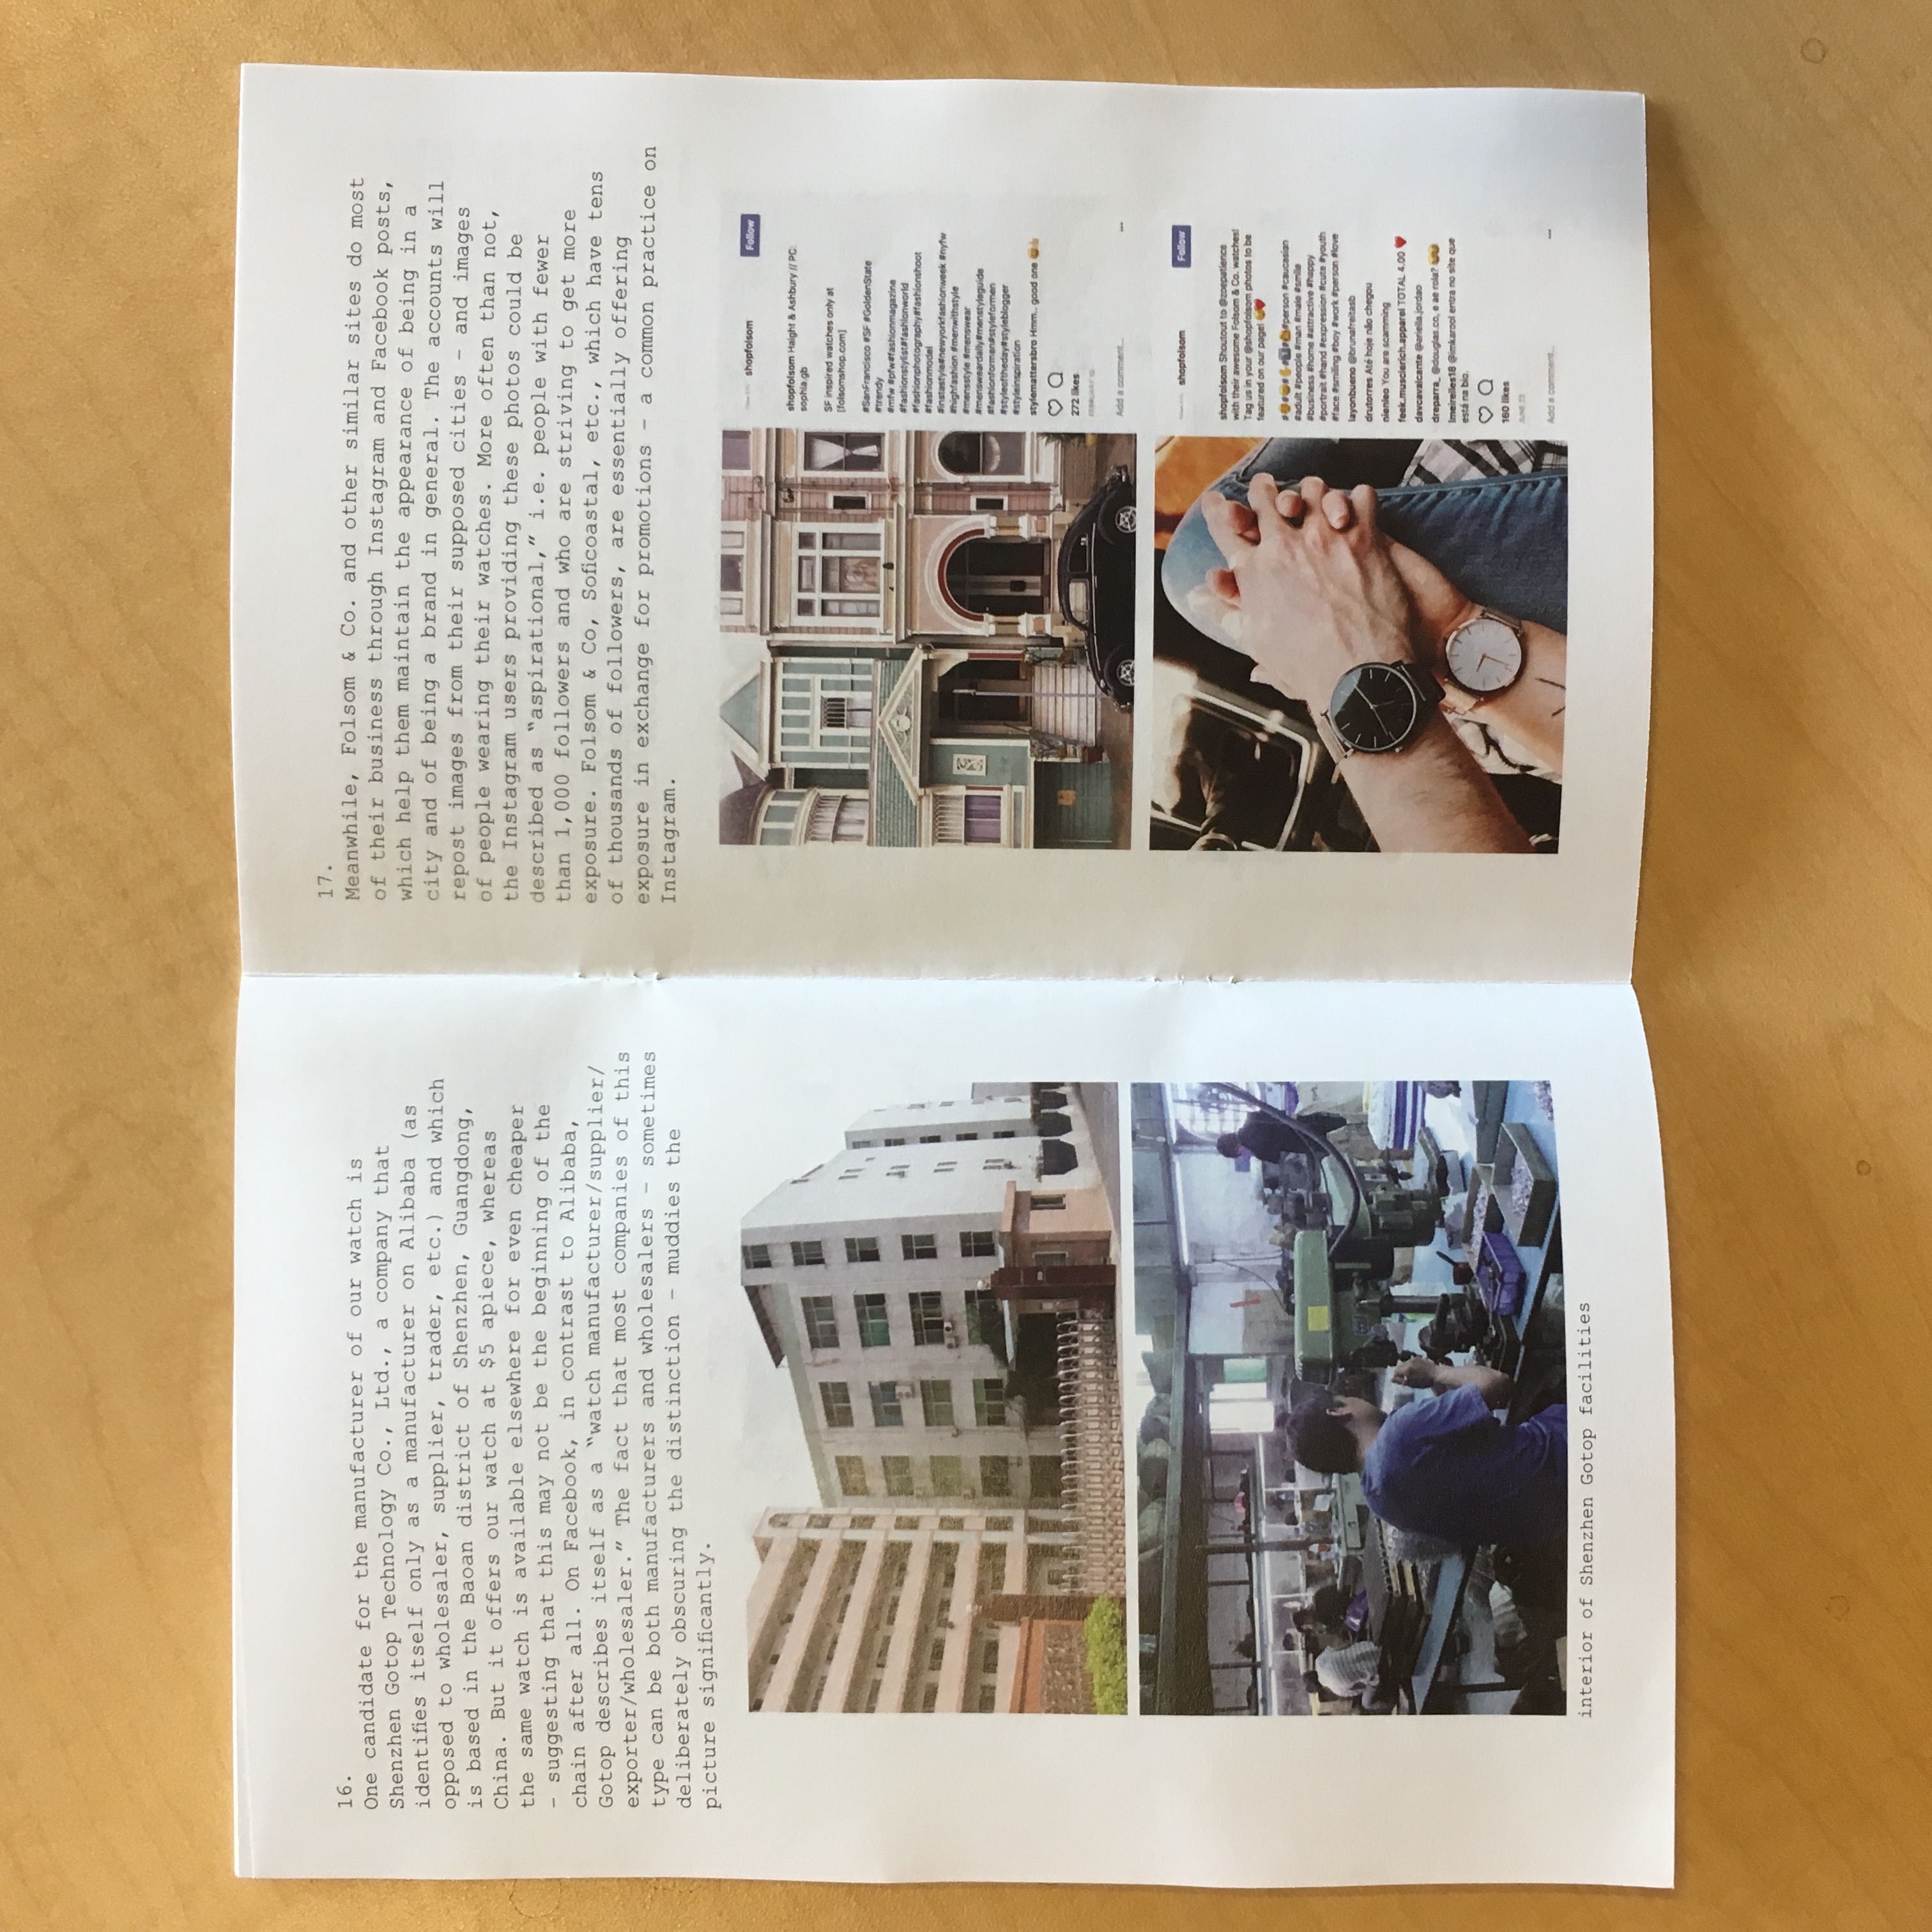 A spread from the zine with paragraphs in Courier font and photos of a factory in China alongside Instagram posts about San Frnacisco and watches